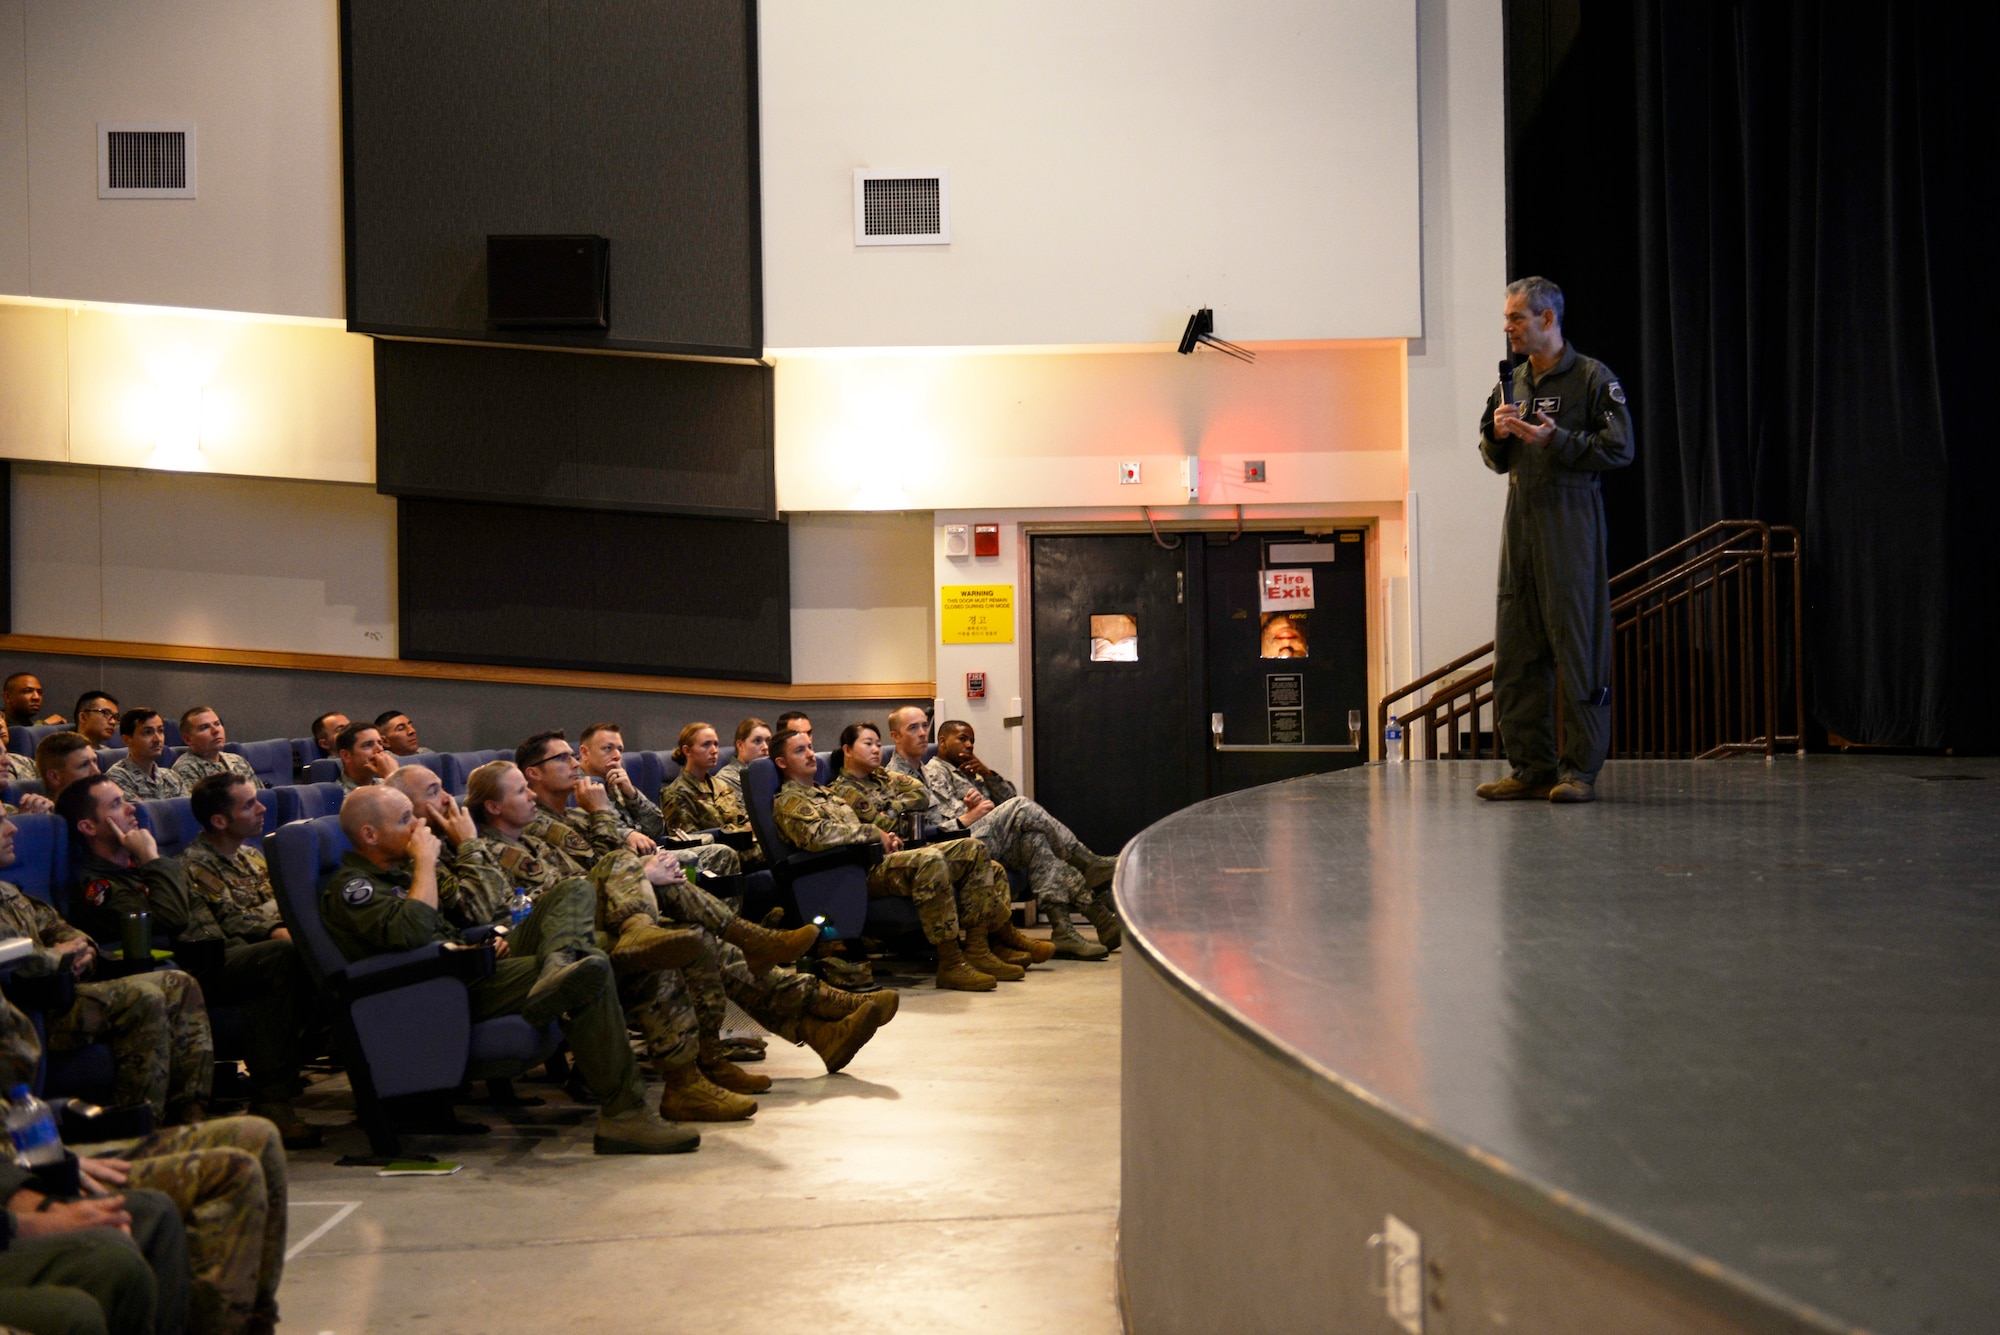 U.S. Air Force Lt. Gen. Kenneth S. Wilsbach, 7th Air Force commander, speaks to the officers of the 8th Fighter Wing during an all call at Kunsan Air Base, Republic of Korea, July 19, 2019. Wilsbach emphasized the importance of continuing to improve how the Air Force develops its officers for the future high-end fight. (U.S. Air Force photo by 1st Lt. Lauren Gao)